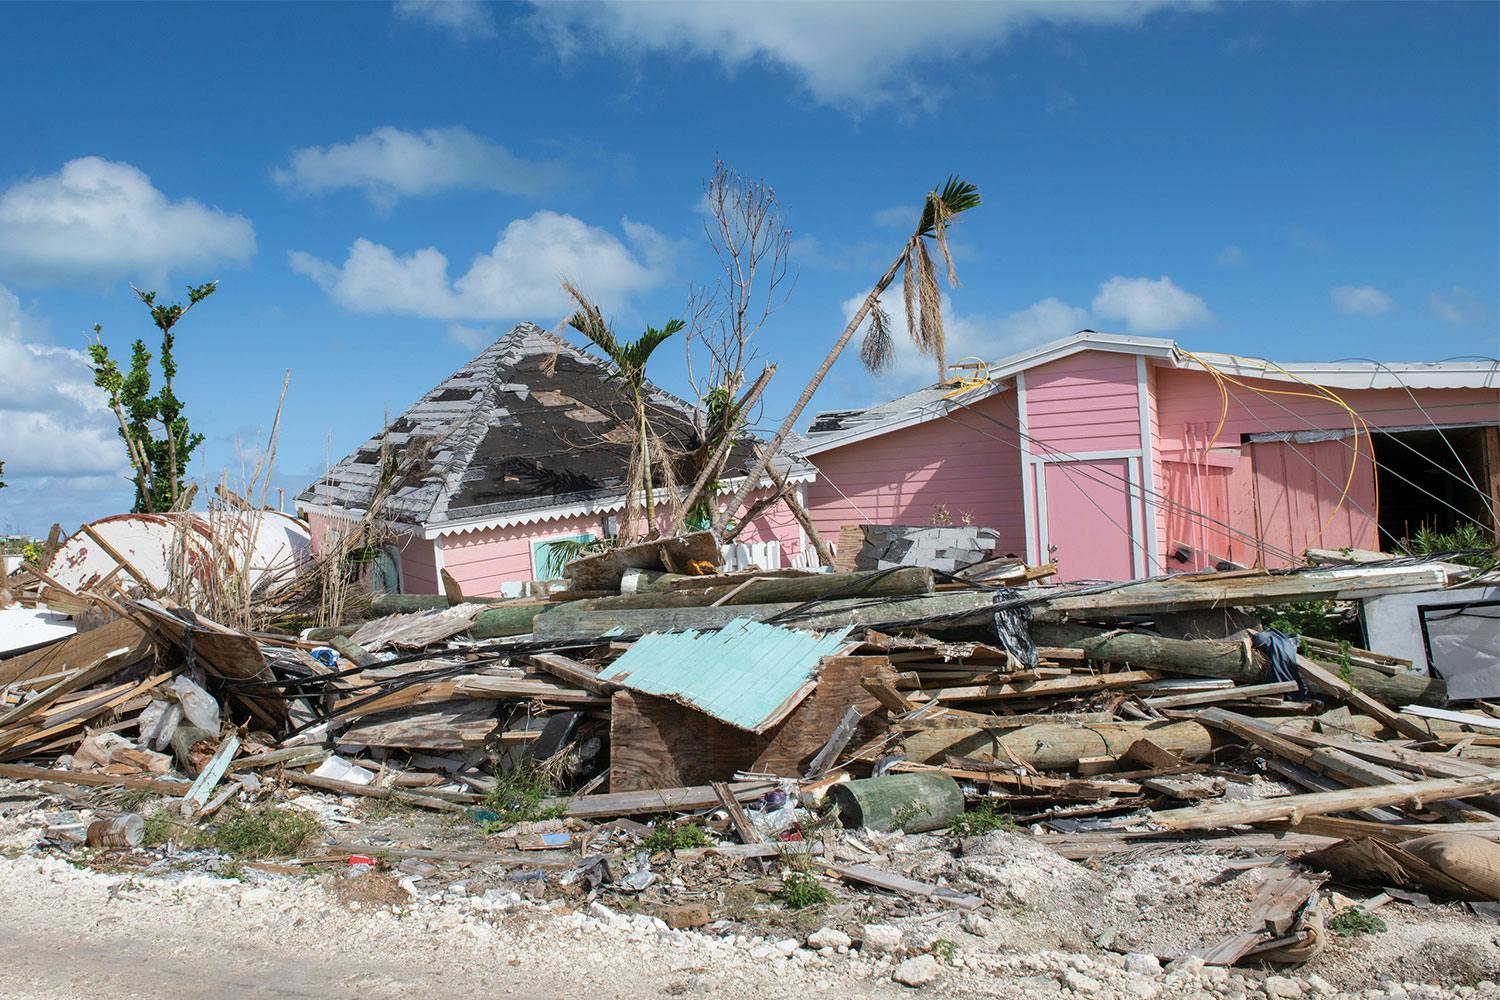 The rubble of a house destroyed by Hurricane Dorian in front of a still partly standing pink house in The Bahamas.